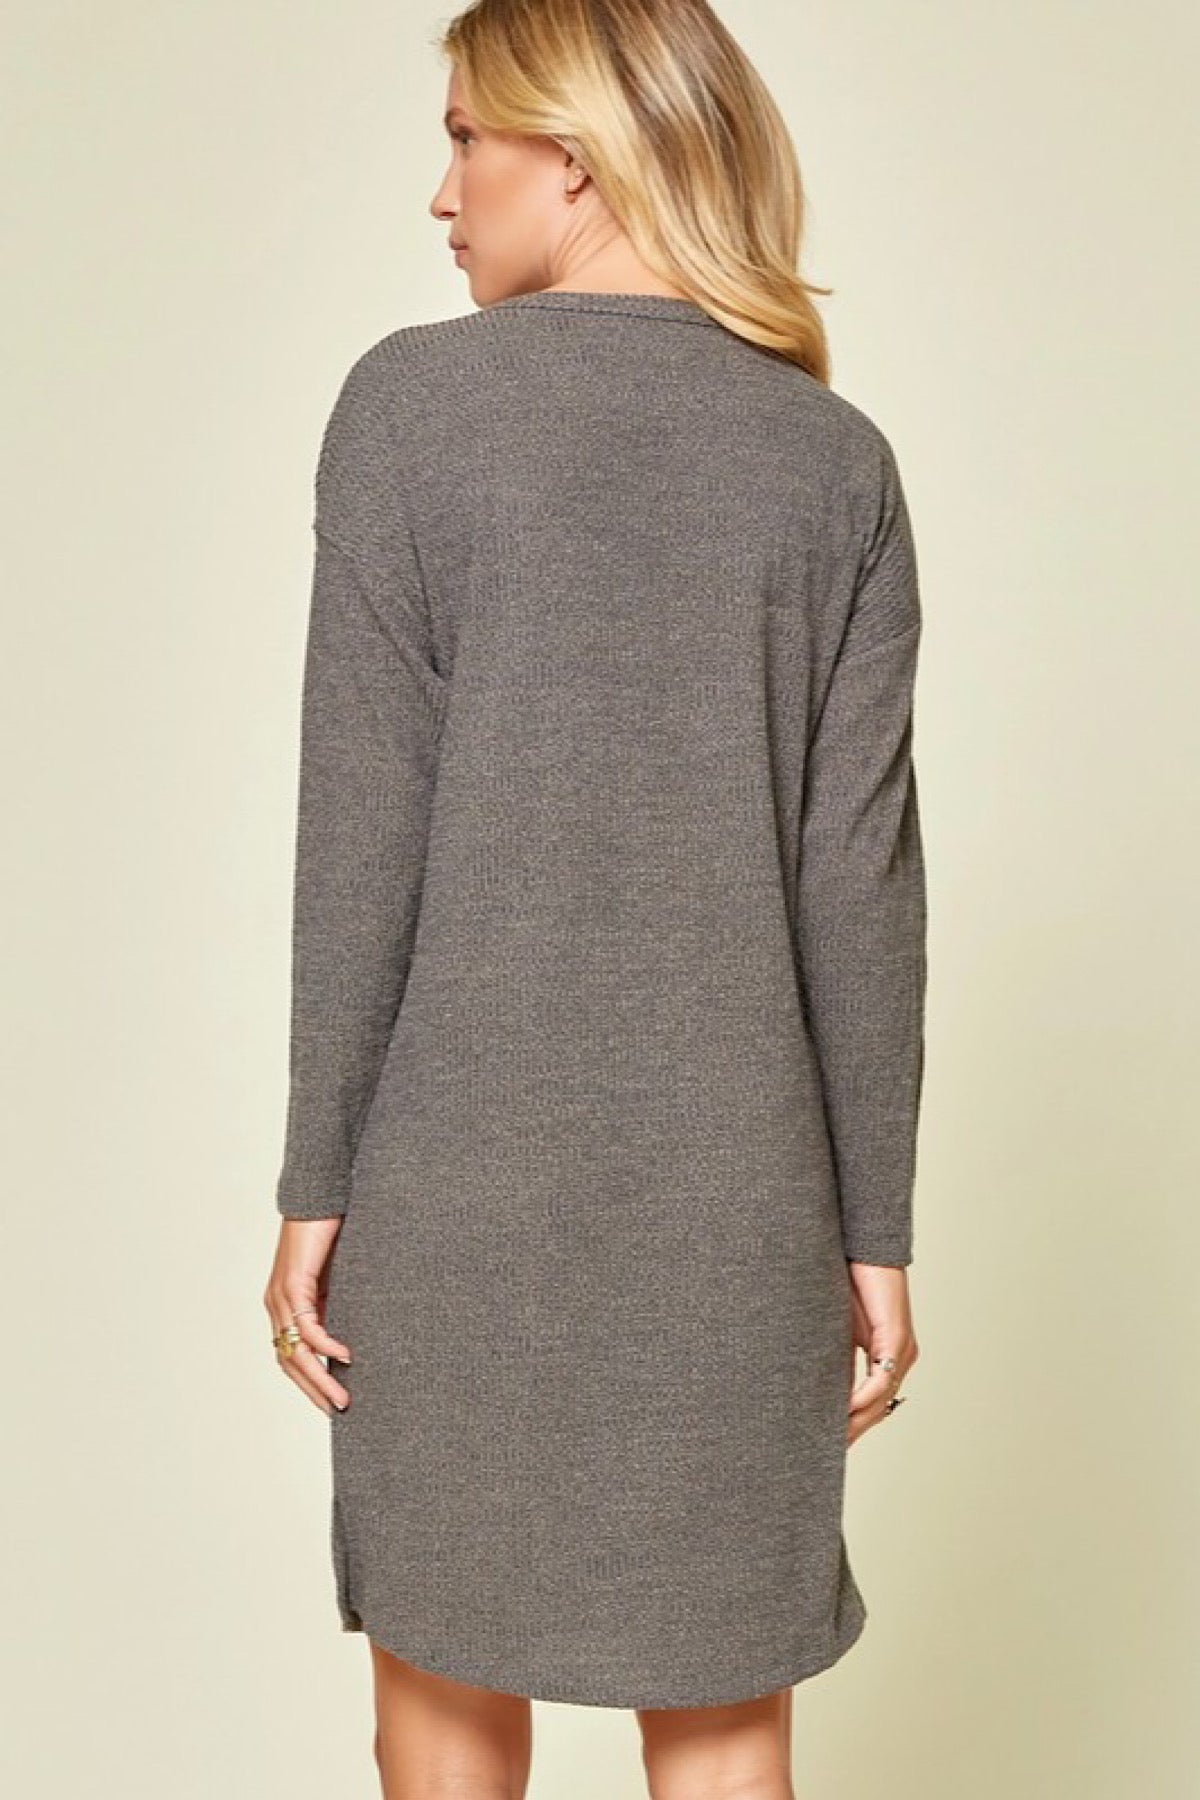 Paige Embroidered Sweater Dress